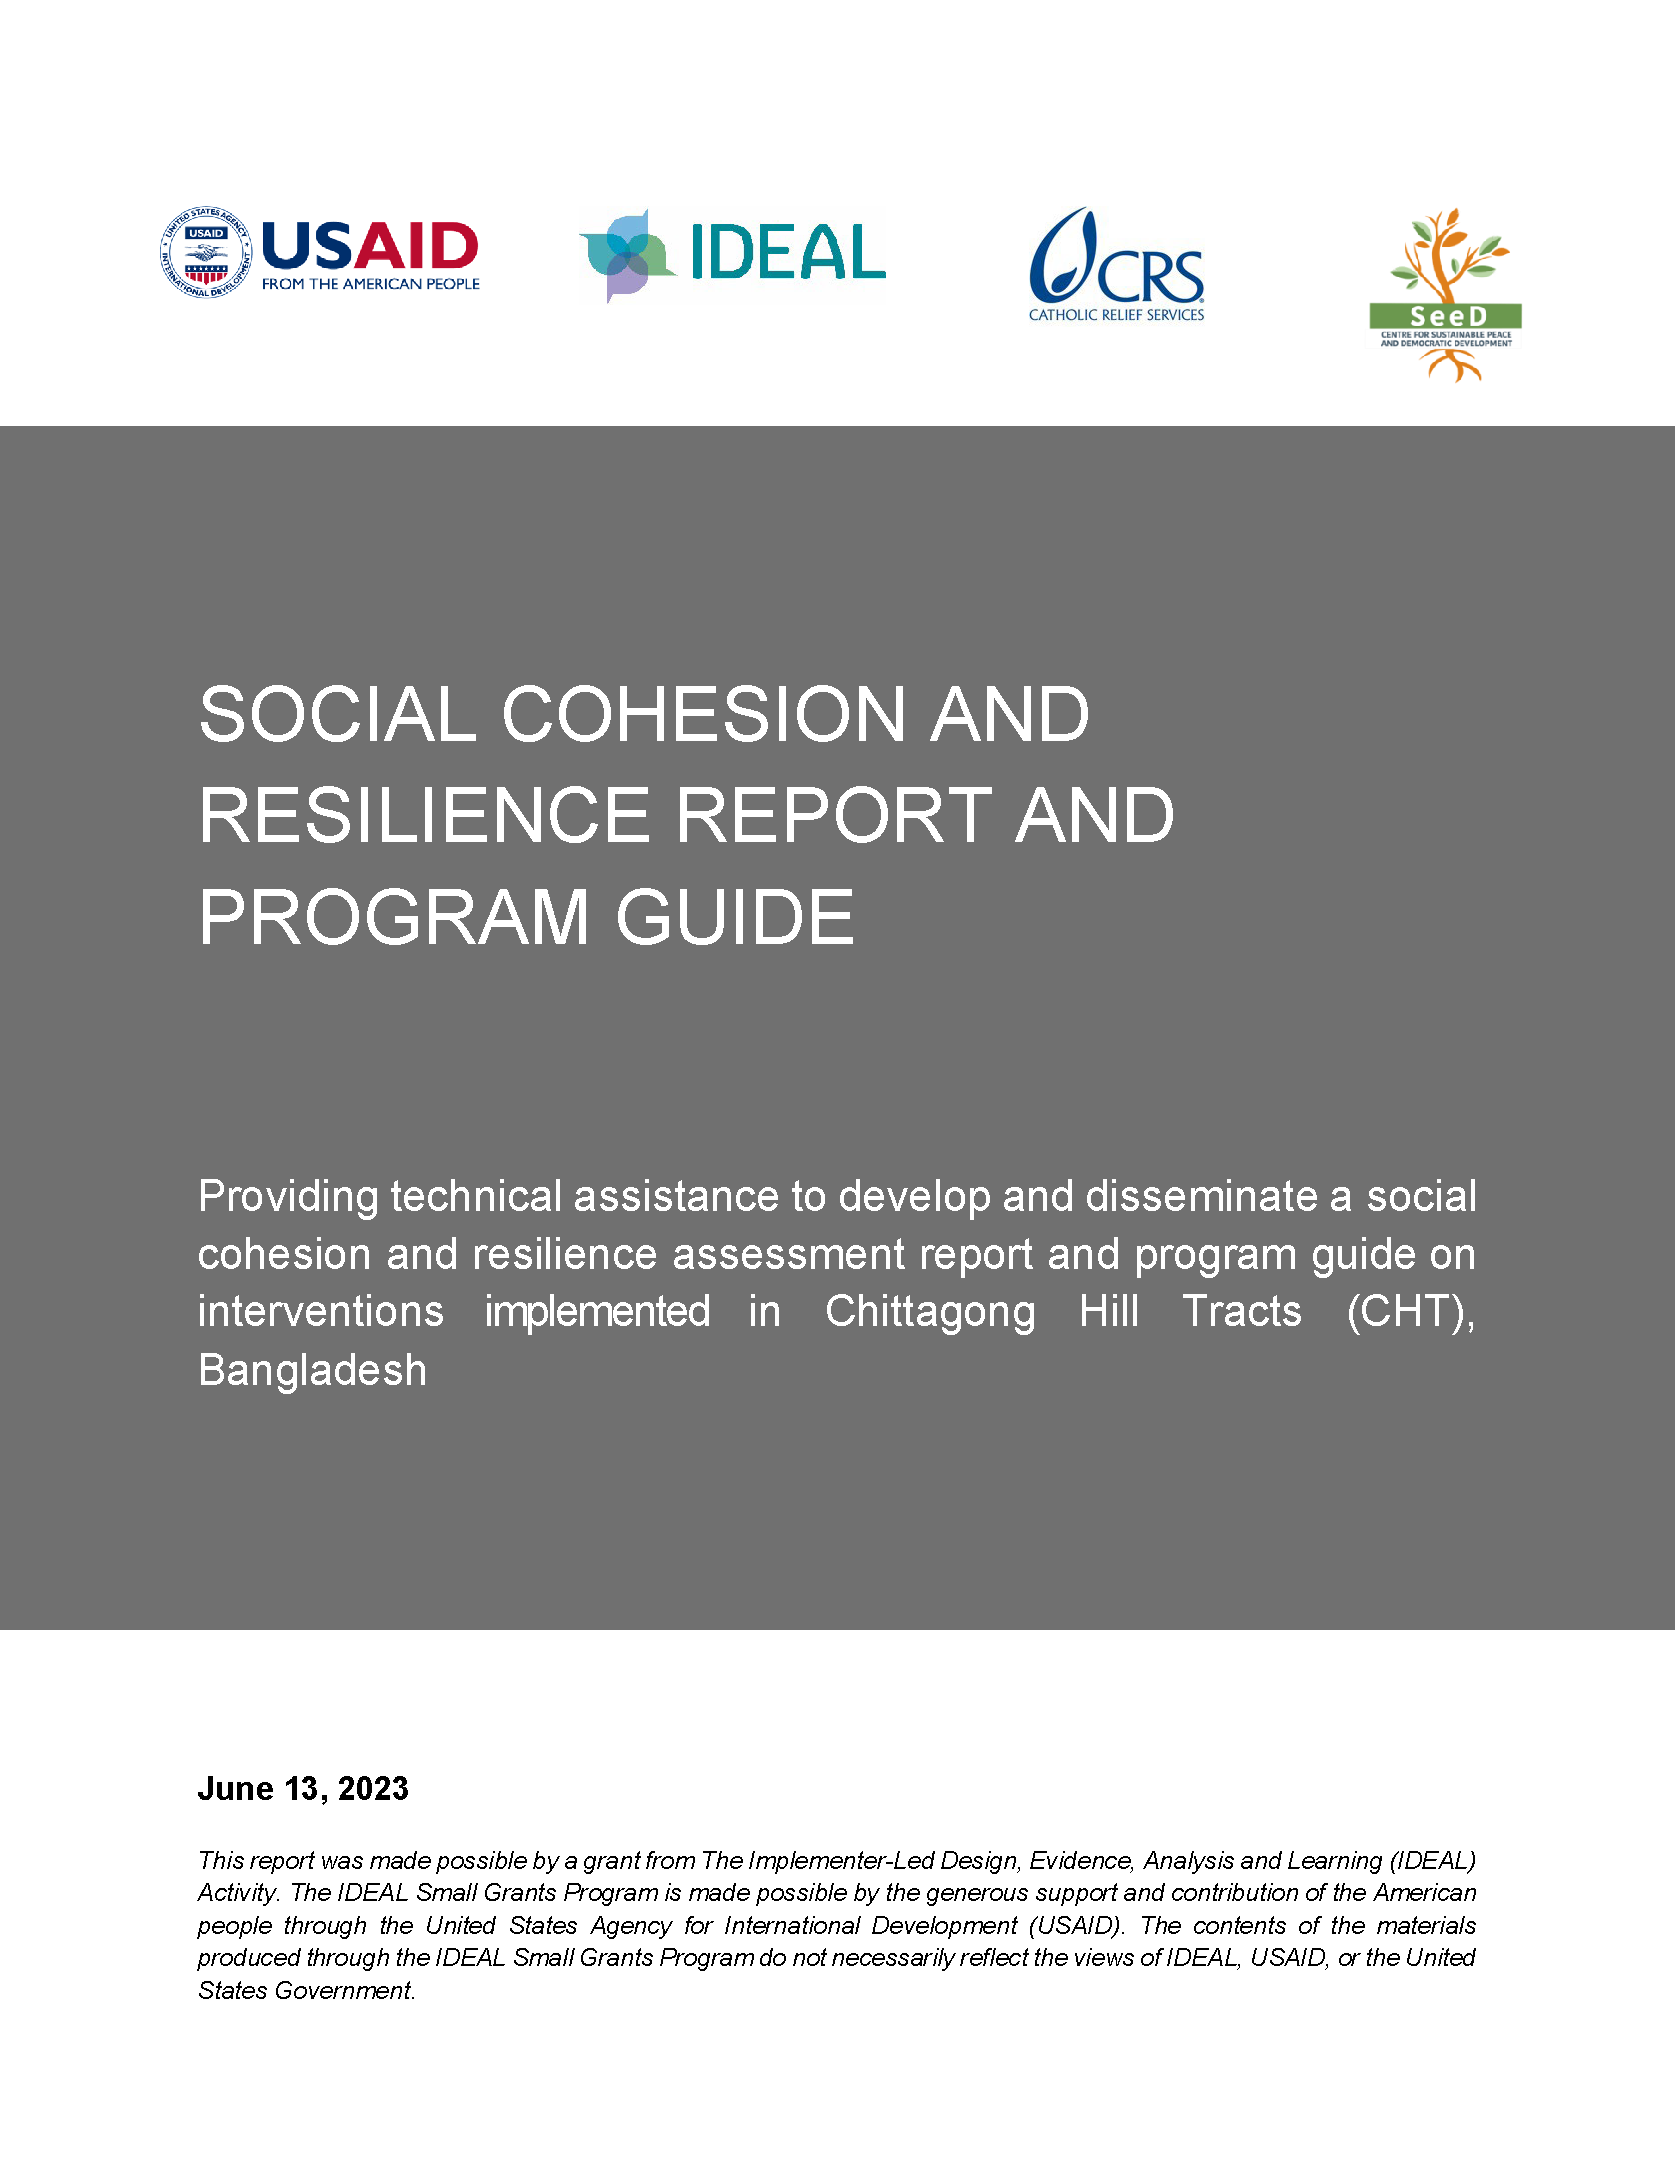 Cover page for Social Cohesion and Resilience Report and Program Guide